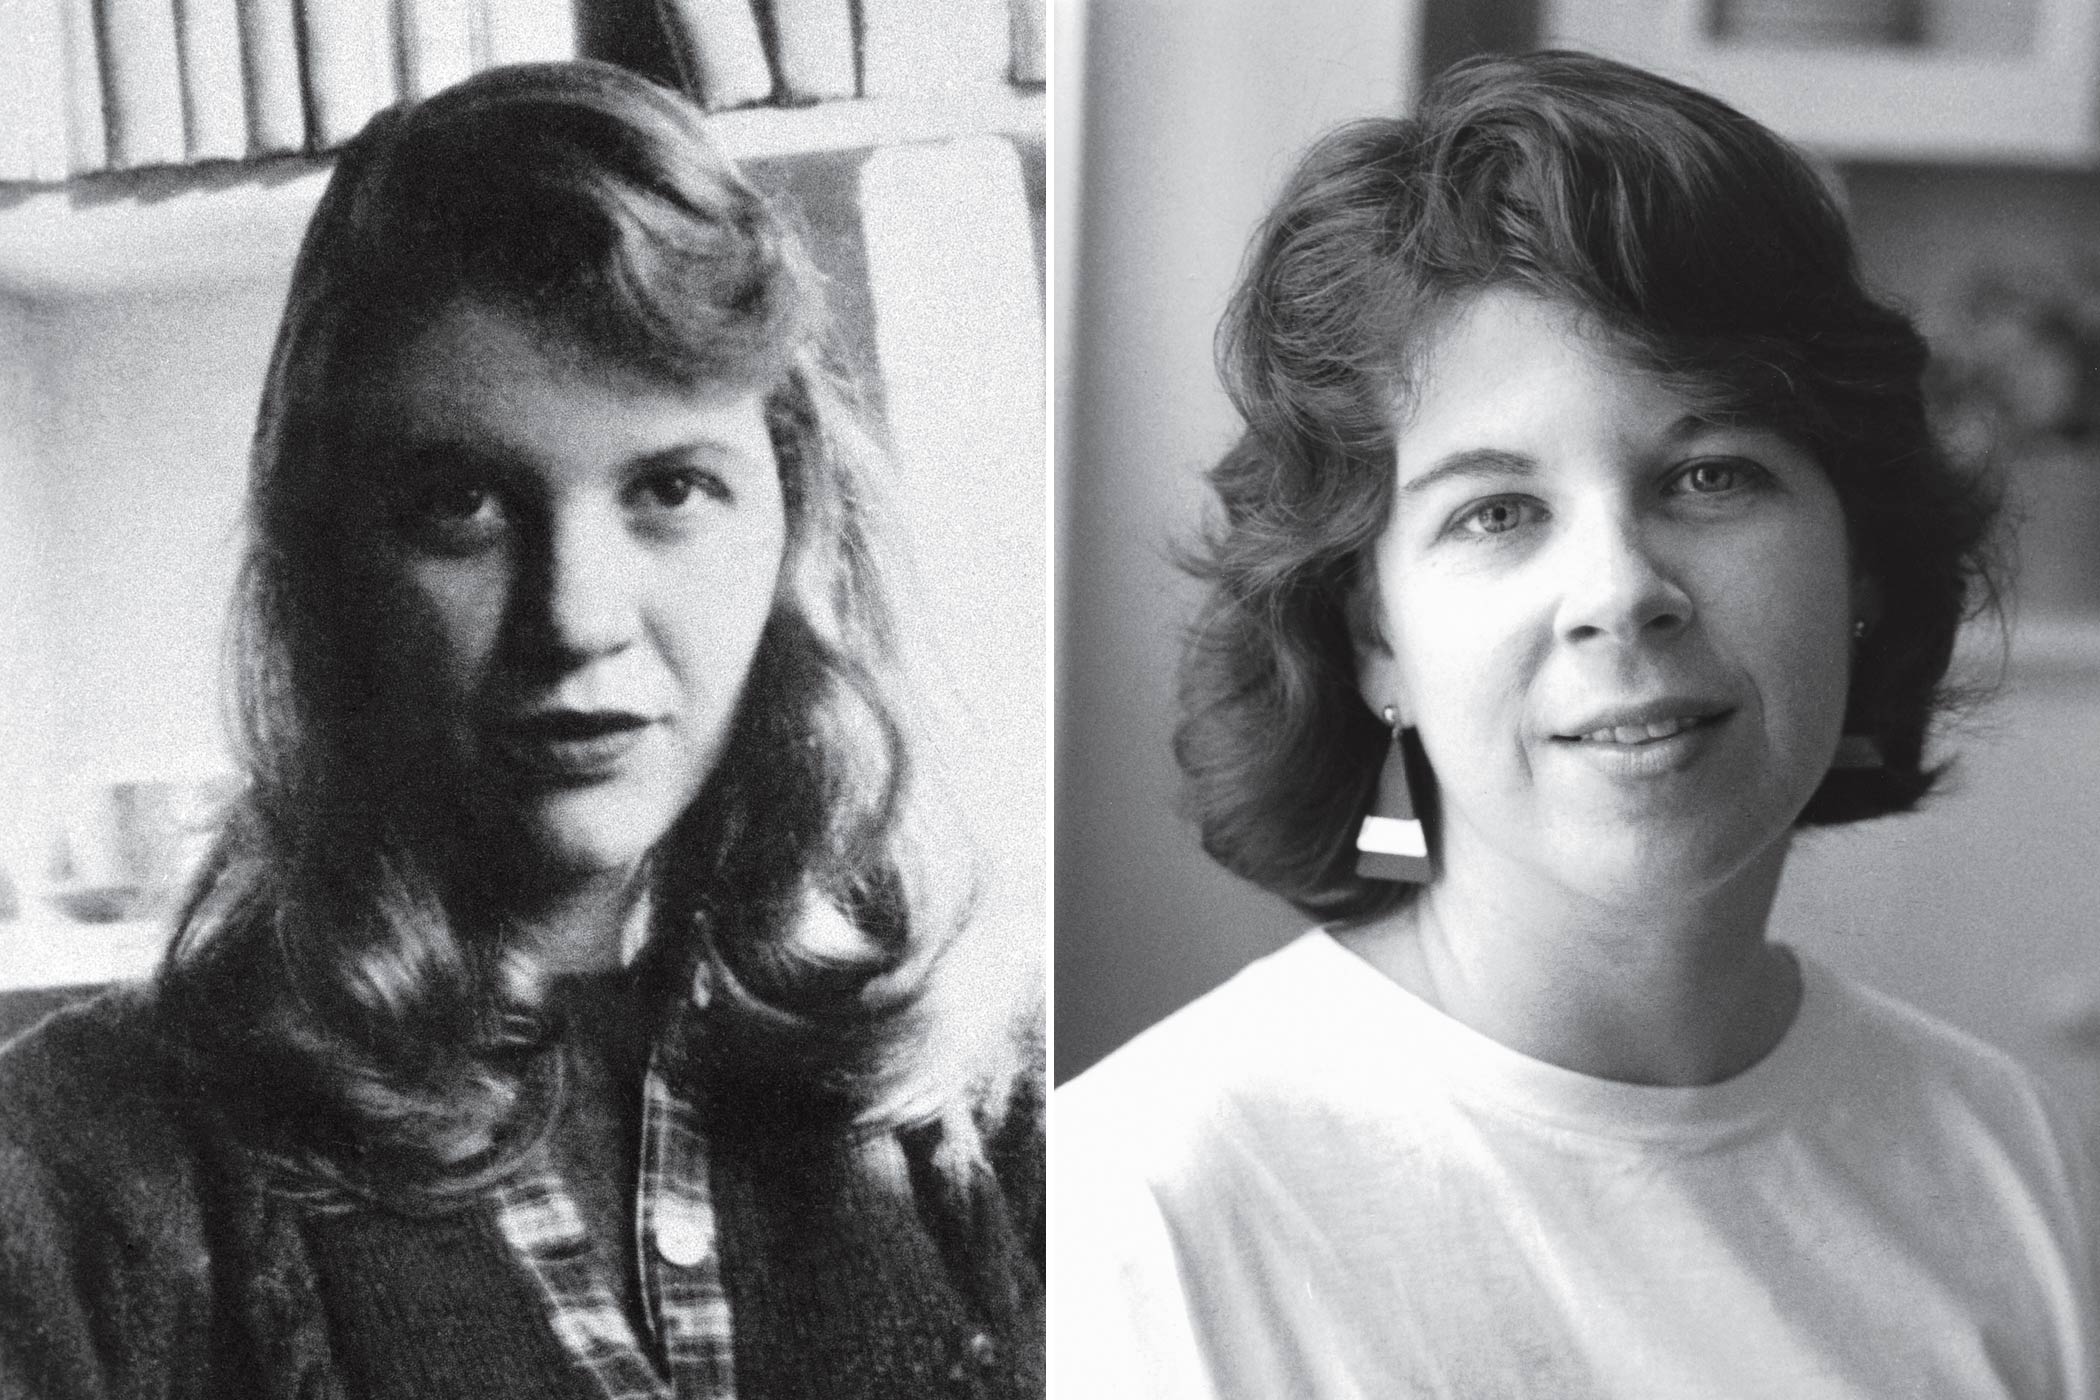 Plath (left, circa 1957) and Wolitzer (pictured during her college years) both studied at Smith College. Both have written about women’s struggles to define themselves. (Bettmann/Corbis; Meg Wolitzer)